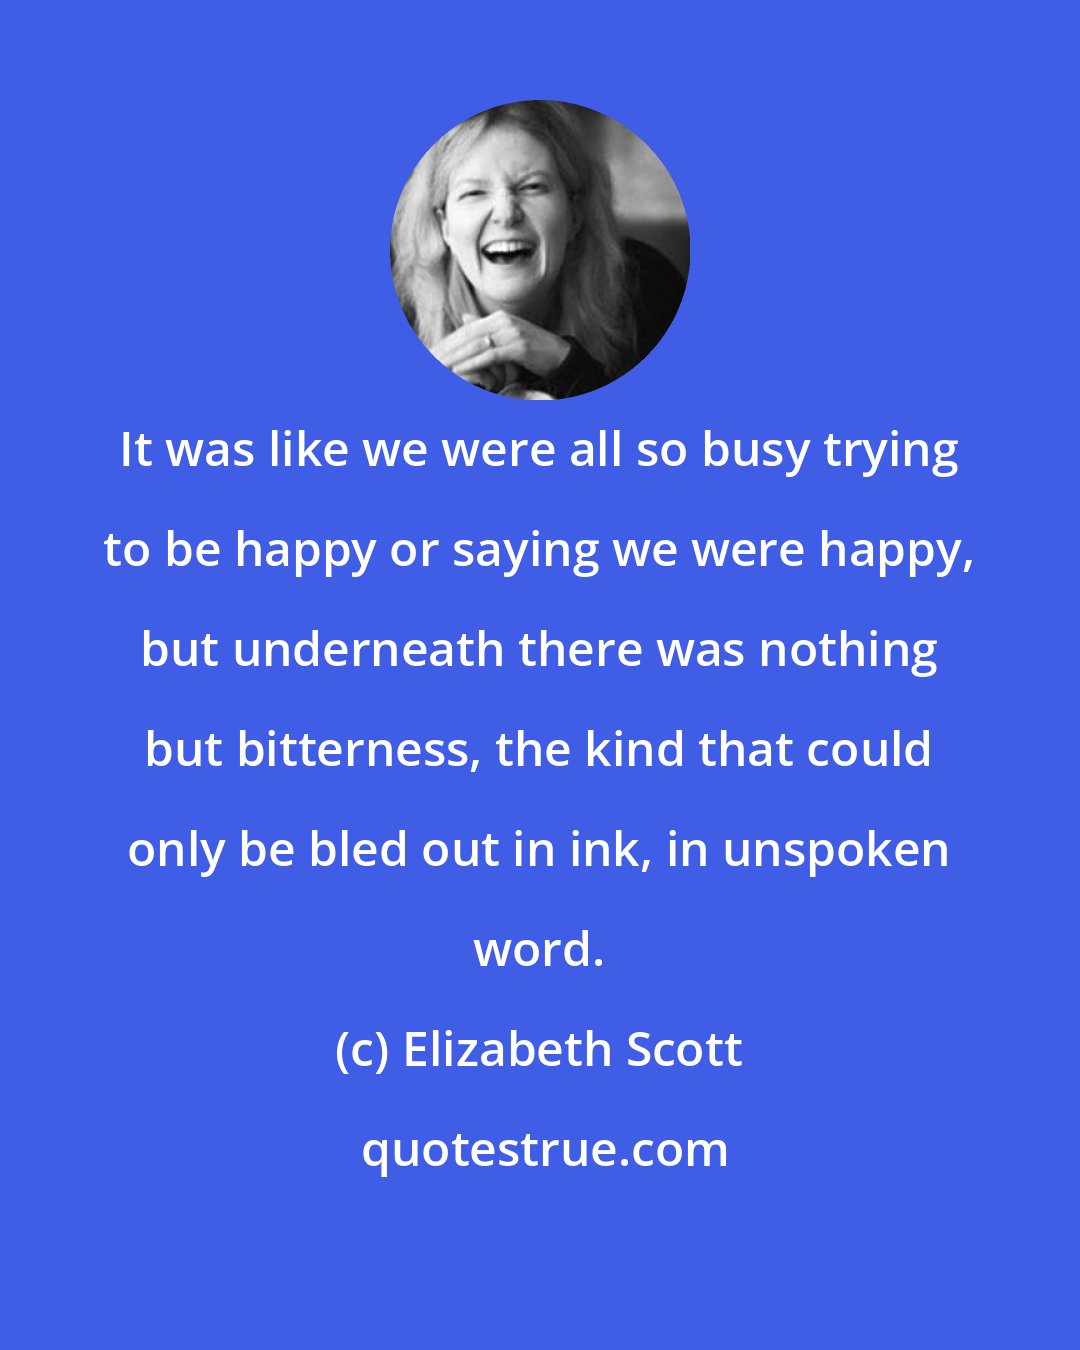 Elizabeth Scott: It was like we were all so busy trying to be happy or saying we were happy, but underneath there was nothing but bitterness, the kind that could only be bled out in ink, in unspoken word.